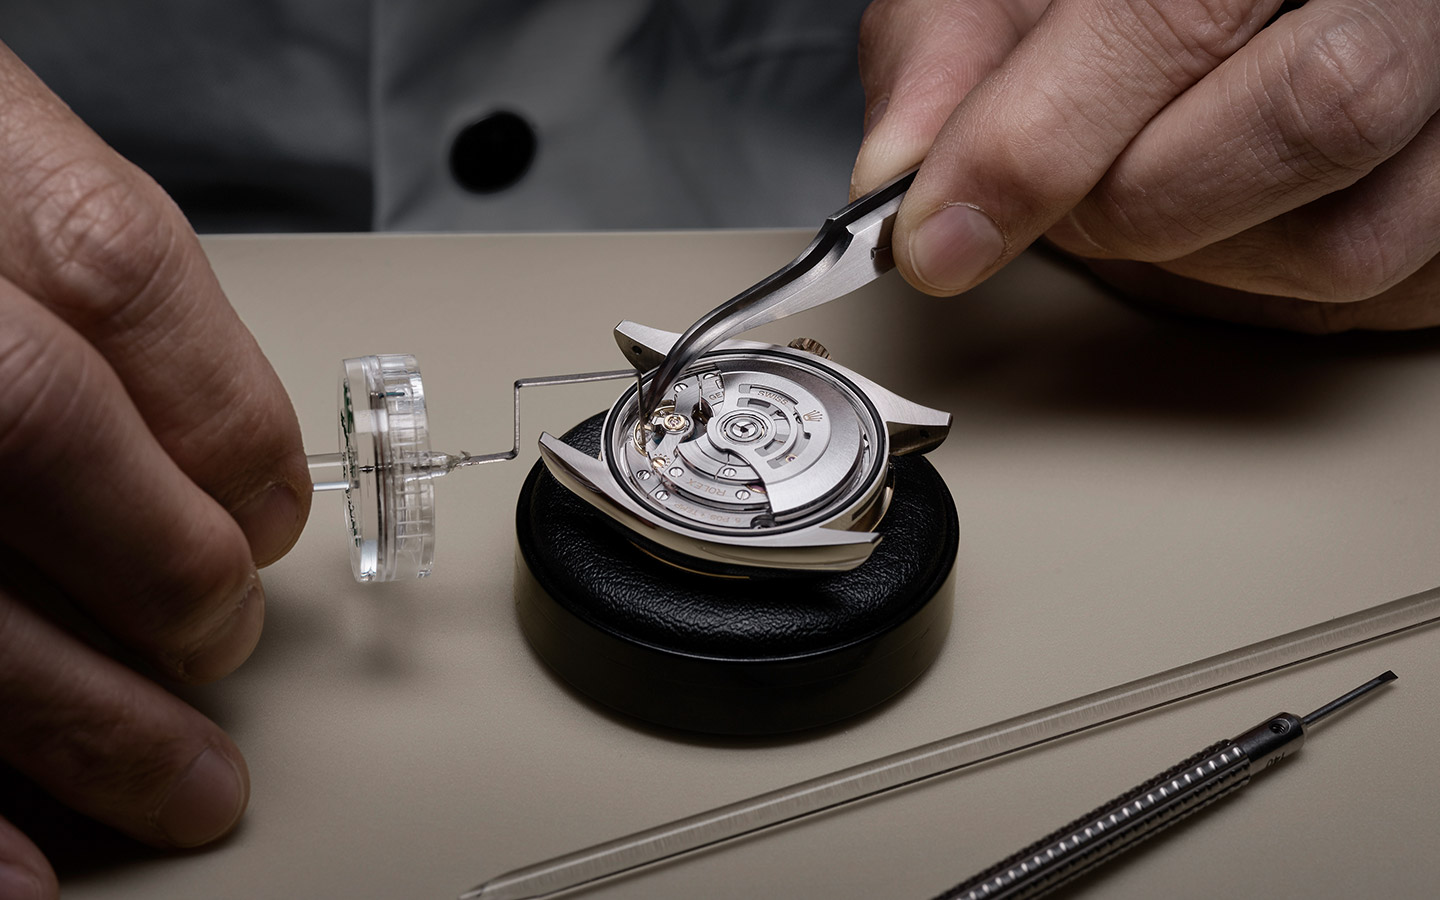 rolex watch being tested for precision